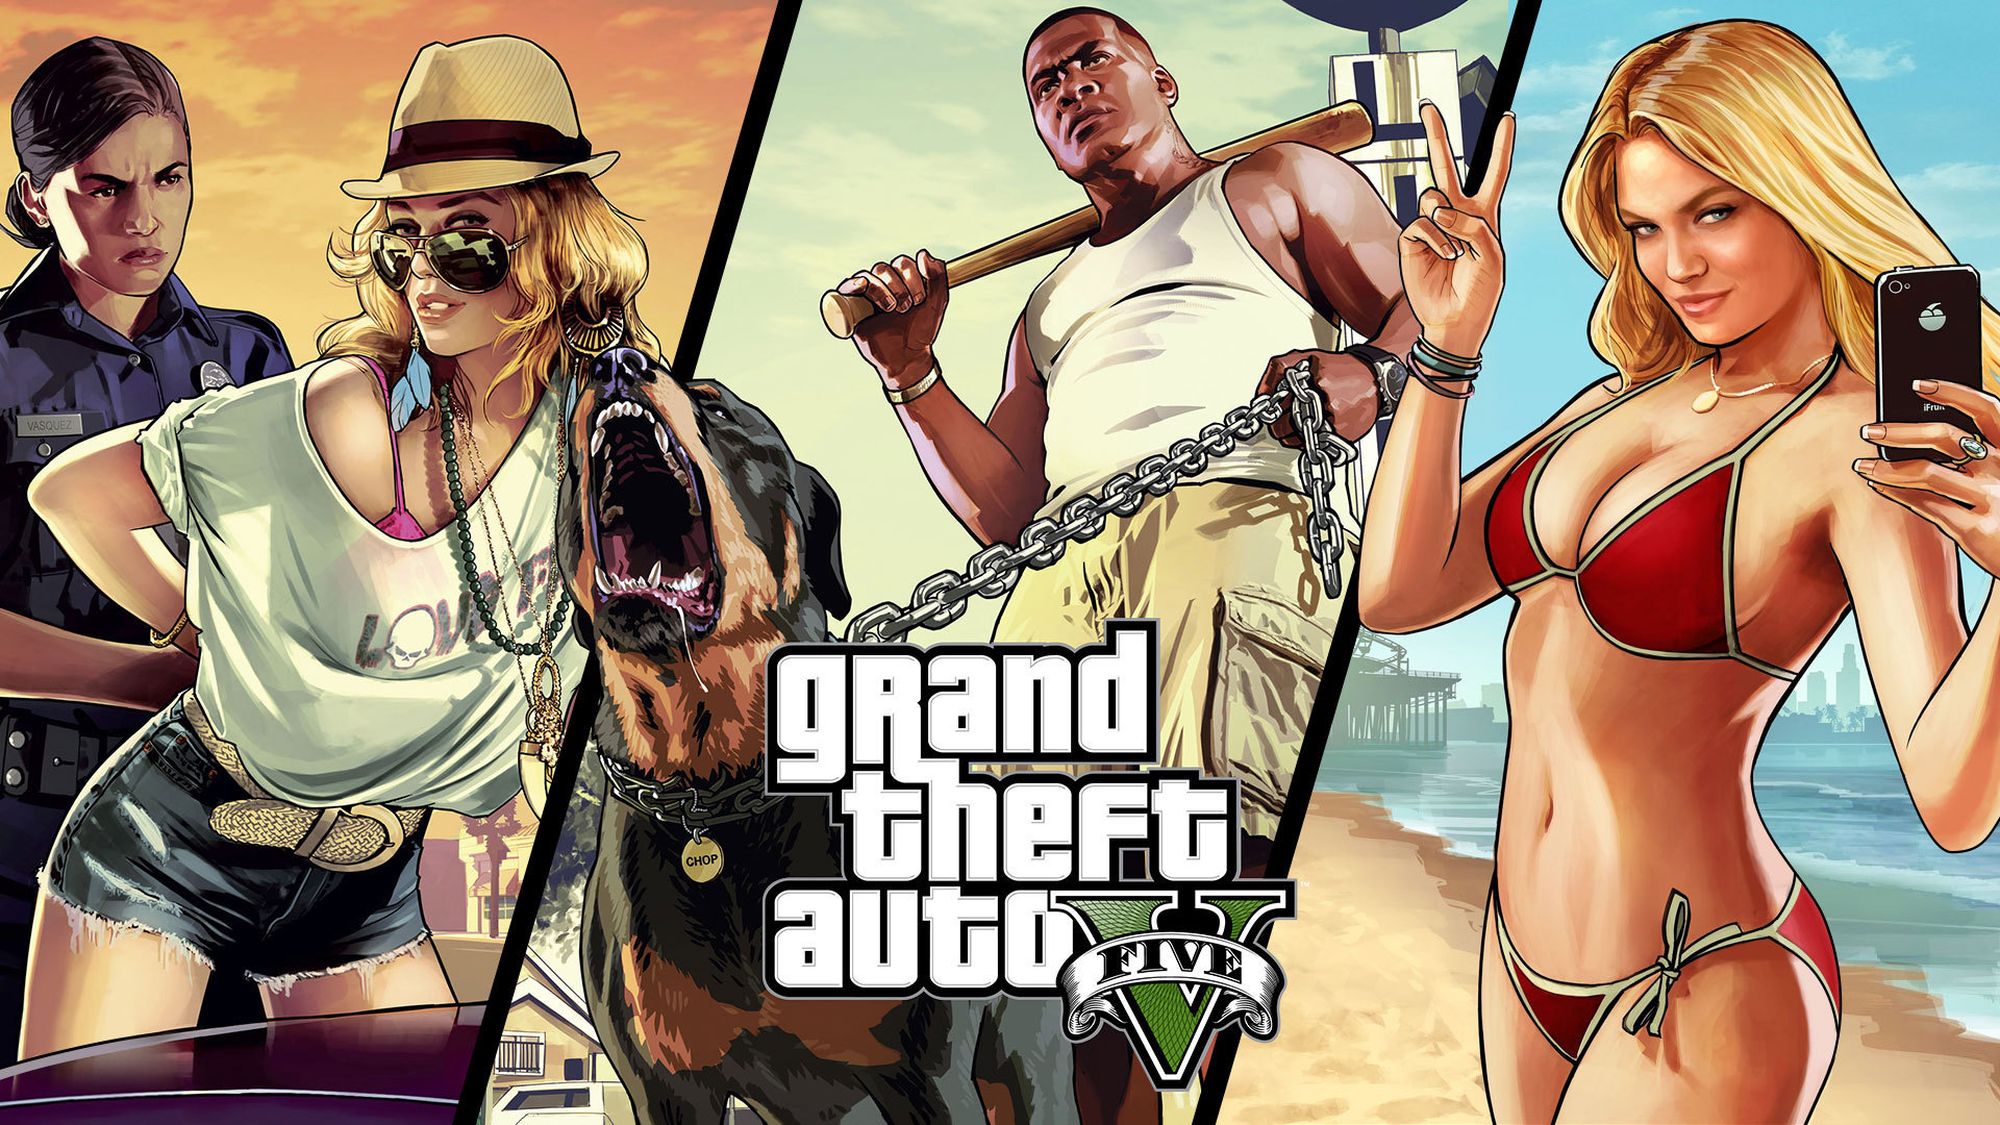 bikini, watch, grand theft auto v, video game, baseball bat, beach, belt, blonde, blue eyes, brown hair, chain, dog, earrings, franklin clinton, hat, long hair, necklace, peace sign, phone, police, ring, shorts, sky, smile, sunglasses, grand theft auto for android